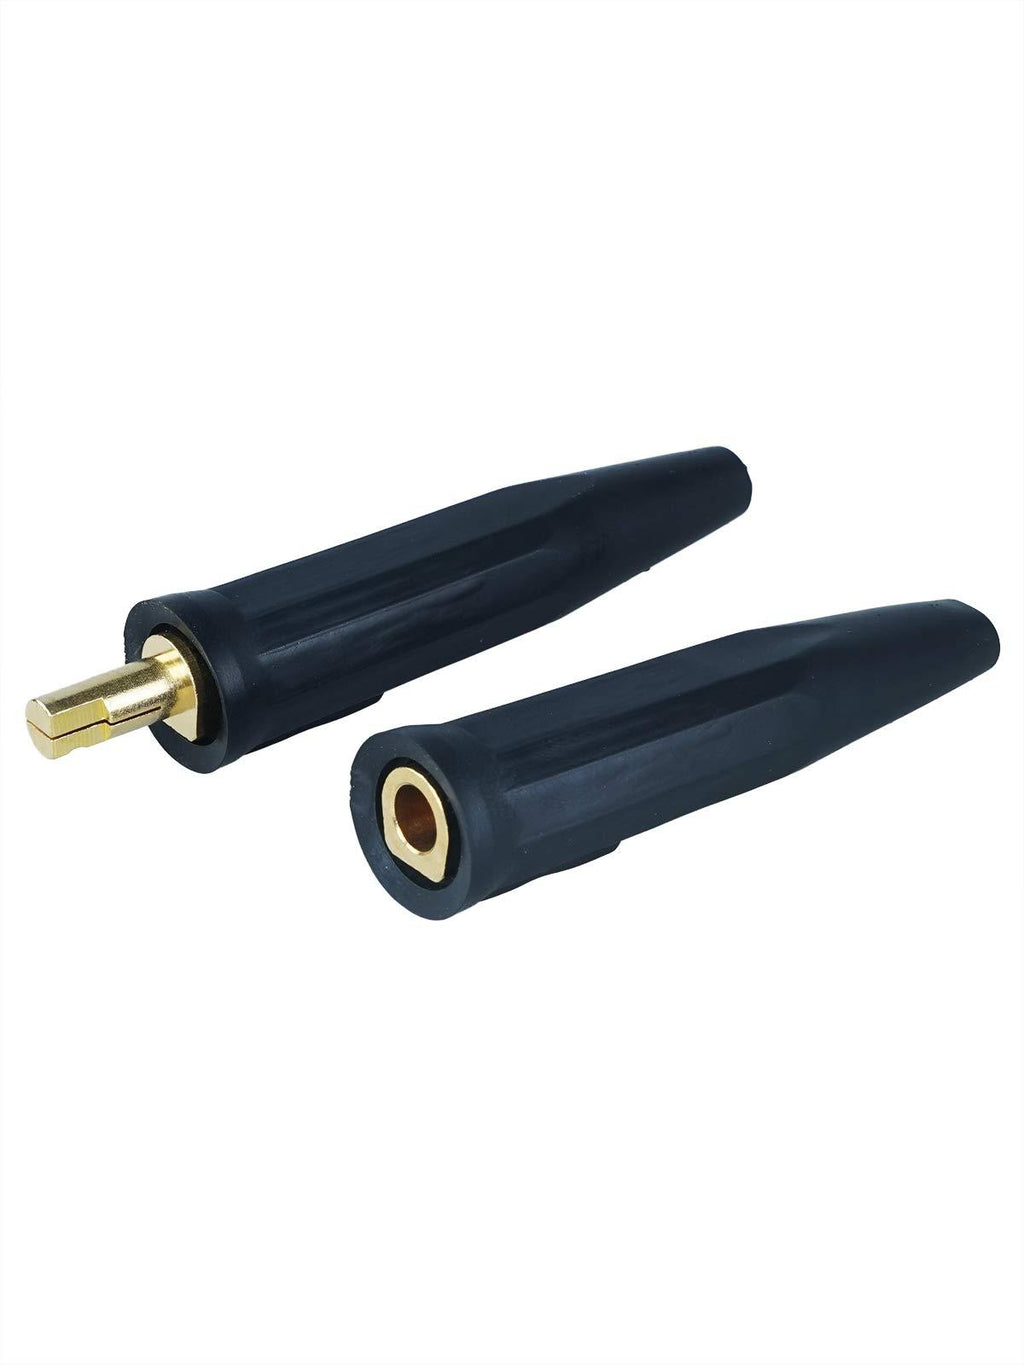  [AUSTRALIA] - 300A Welding Cable Quick Connector Set Camlock Style Male&Female for 1-1/0 Cable 300A